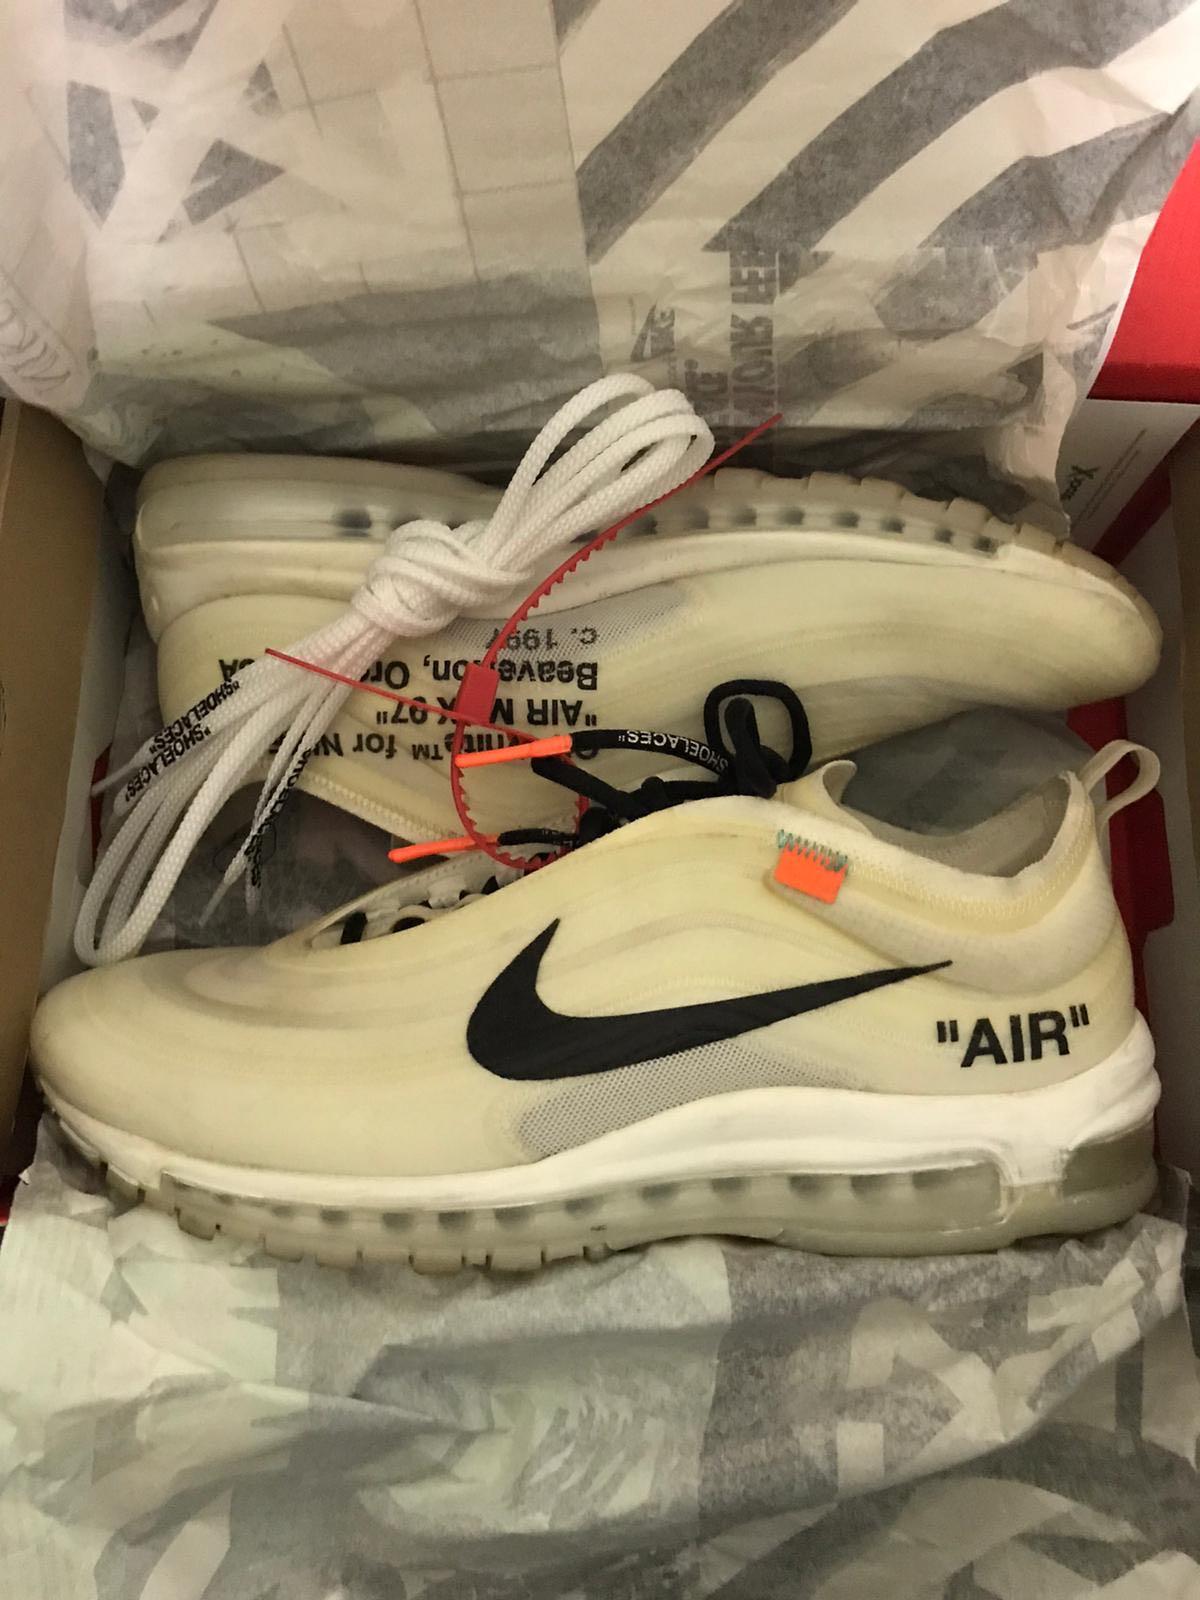 off white air max 97 yellowing